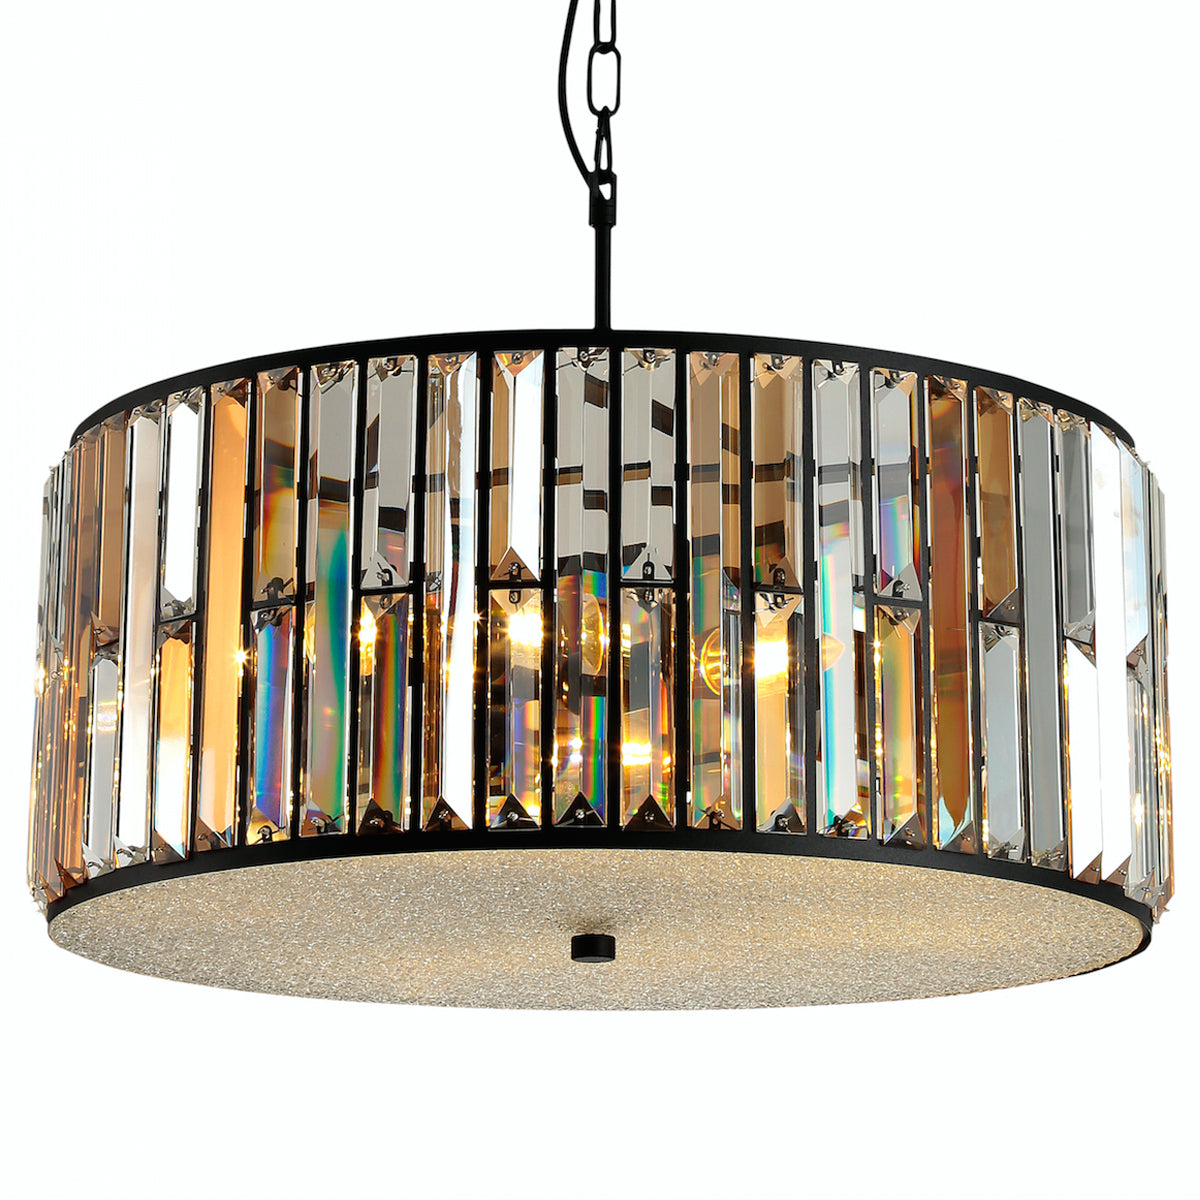 Looking for something that little more extravagant that will give your room the touch of luxury that it really deserves. Our Amber Crystal ceiling pendant light does just that with its bronze, brown and silver glass crystals in a round design and complemented with a black metal adjustable chain creating something truly spectacular.